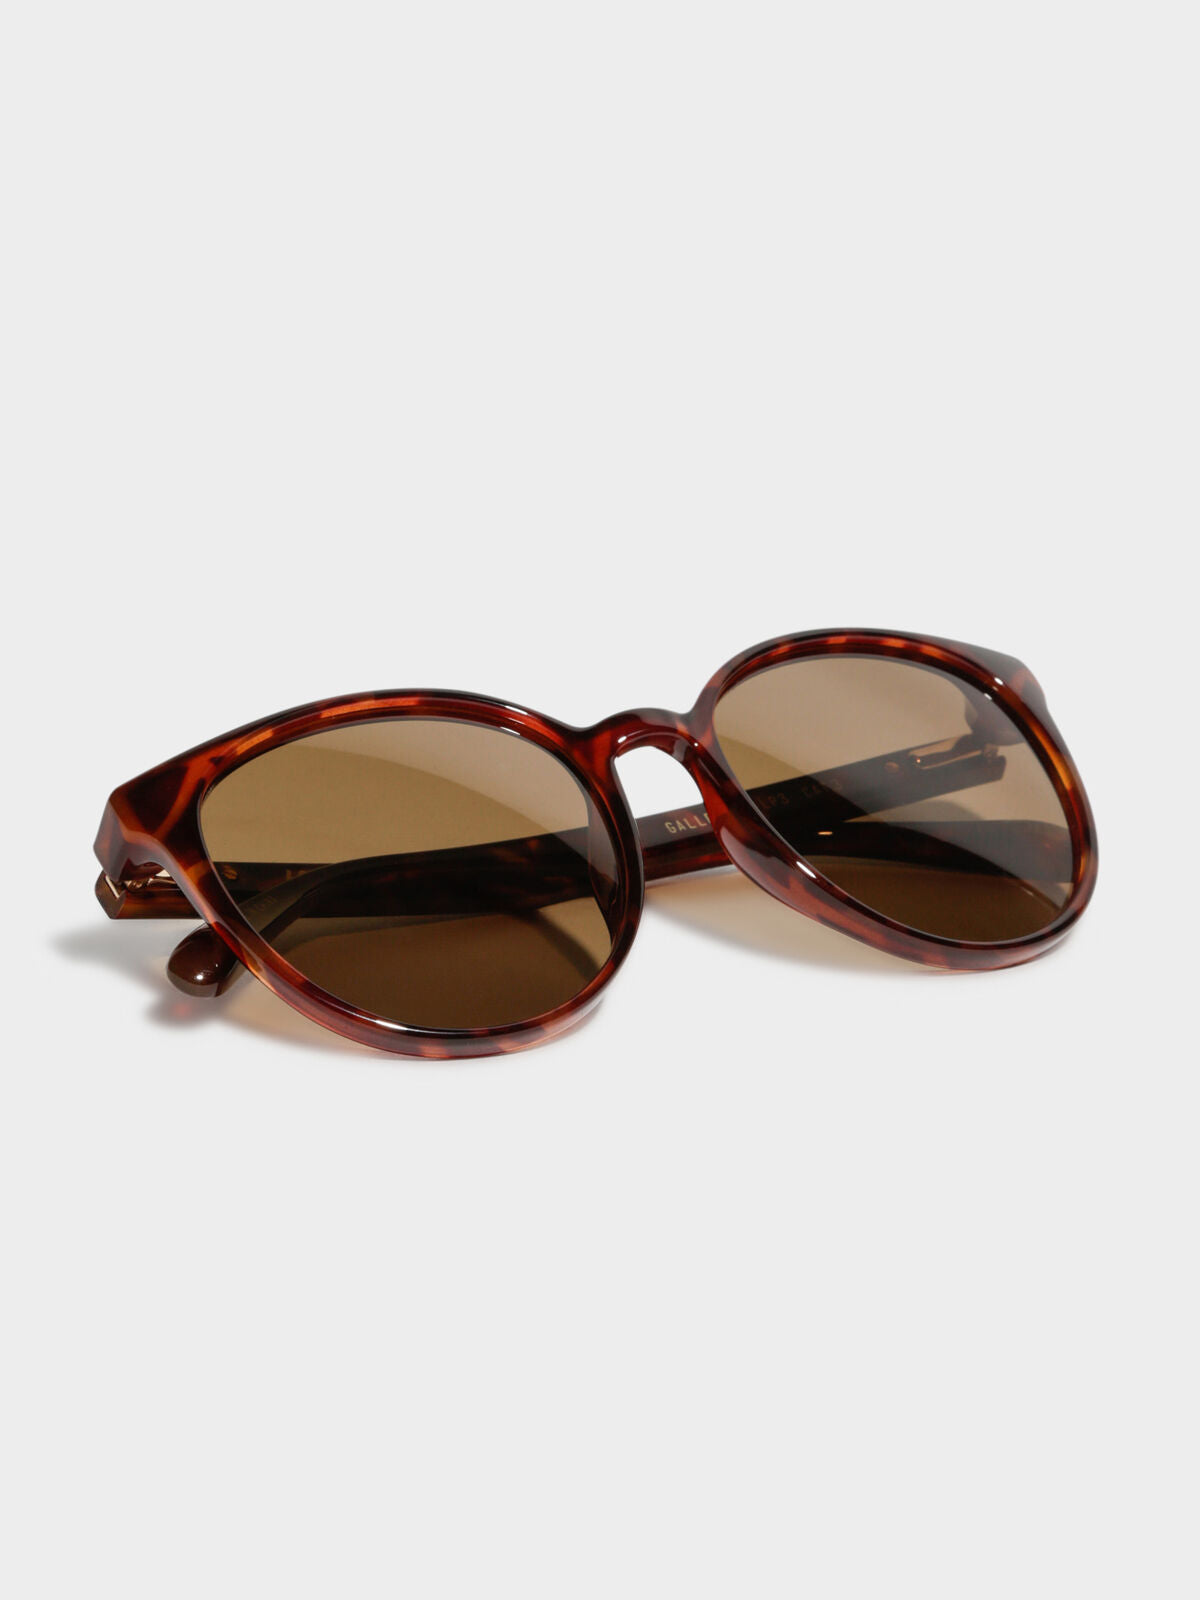 Gallery TLP3 Polarised Sunglasses in Polished Tortiseshell